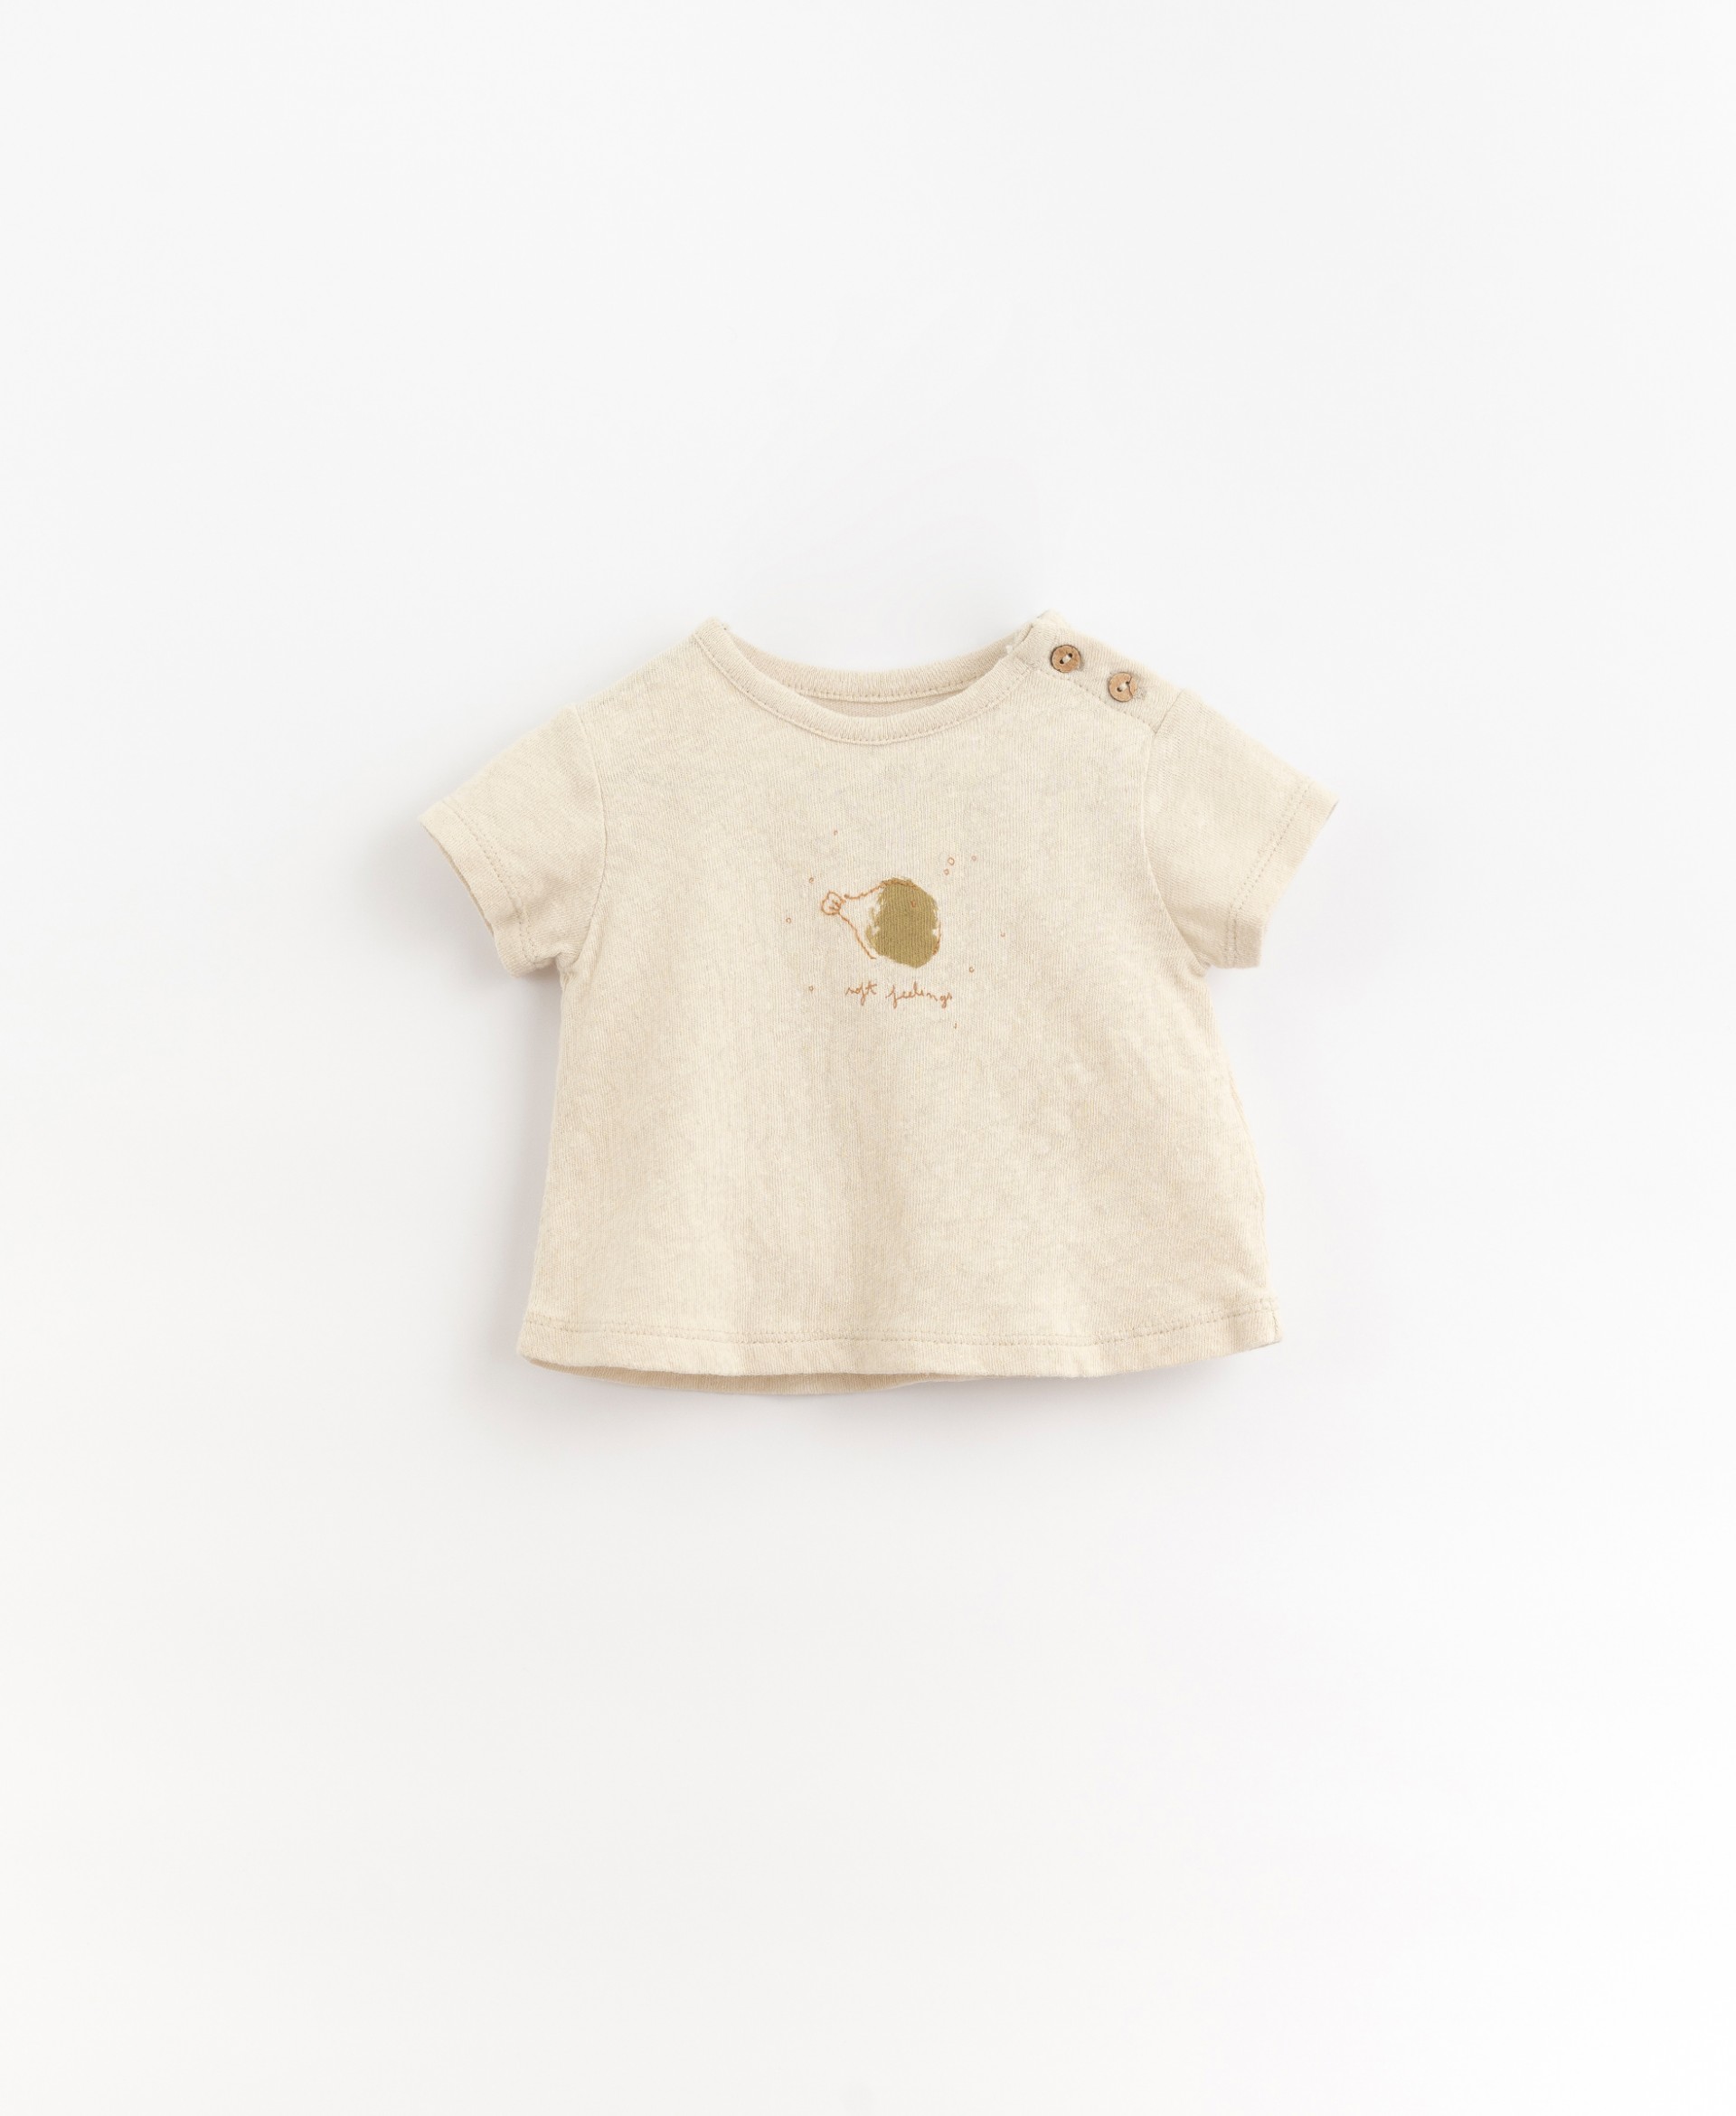 T-shirt in with mixture of organic cotton and linen | Organic Care